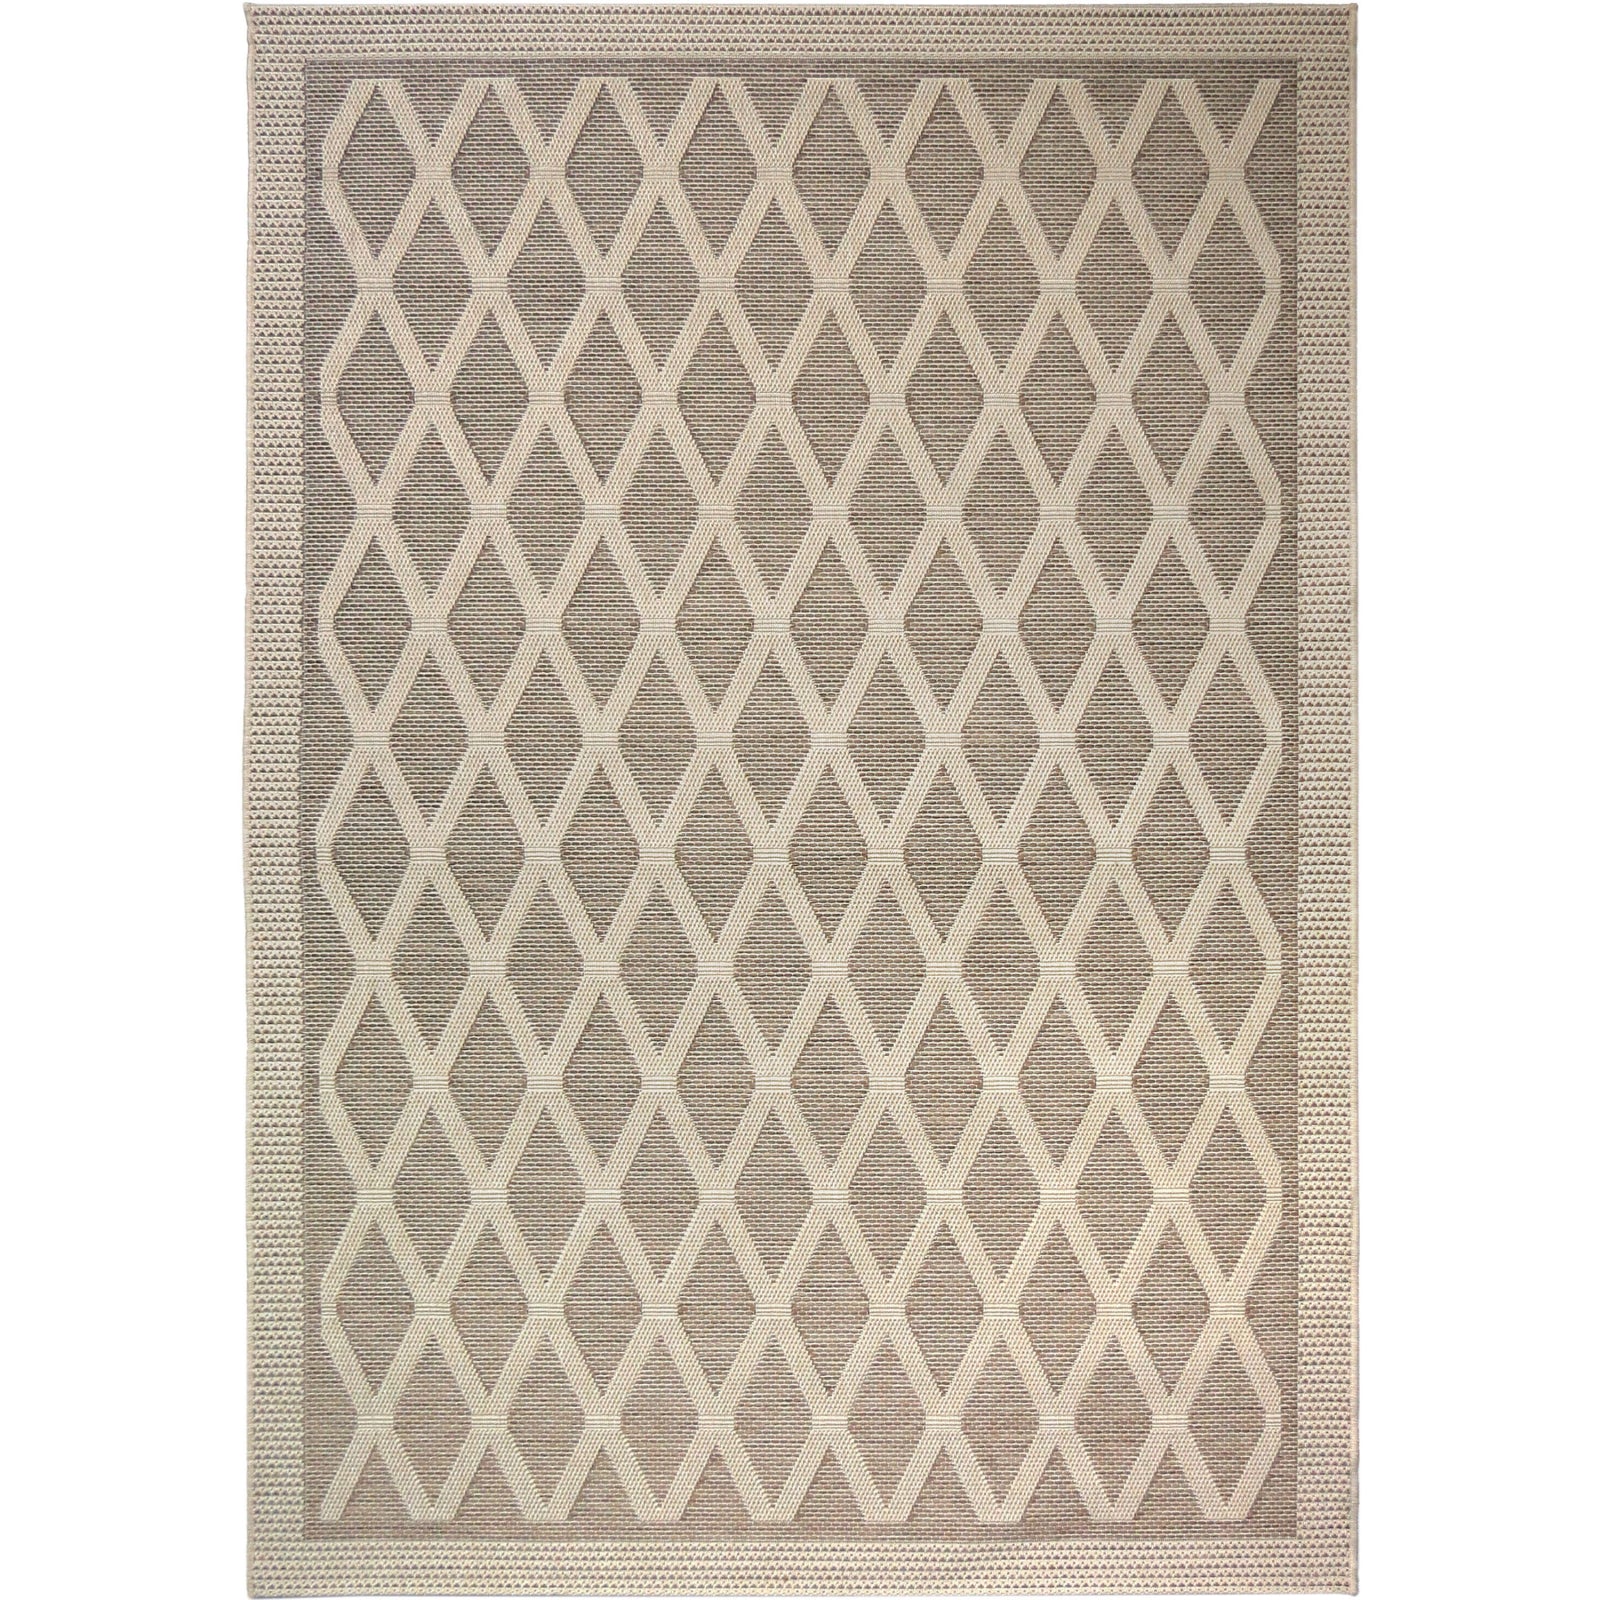 Orian Rugs Waterfront Crossing Lines Tan Area Rug main image